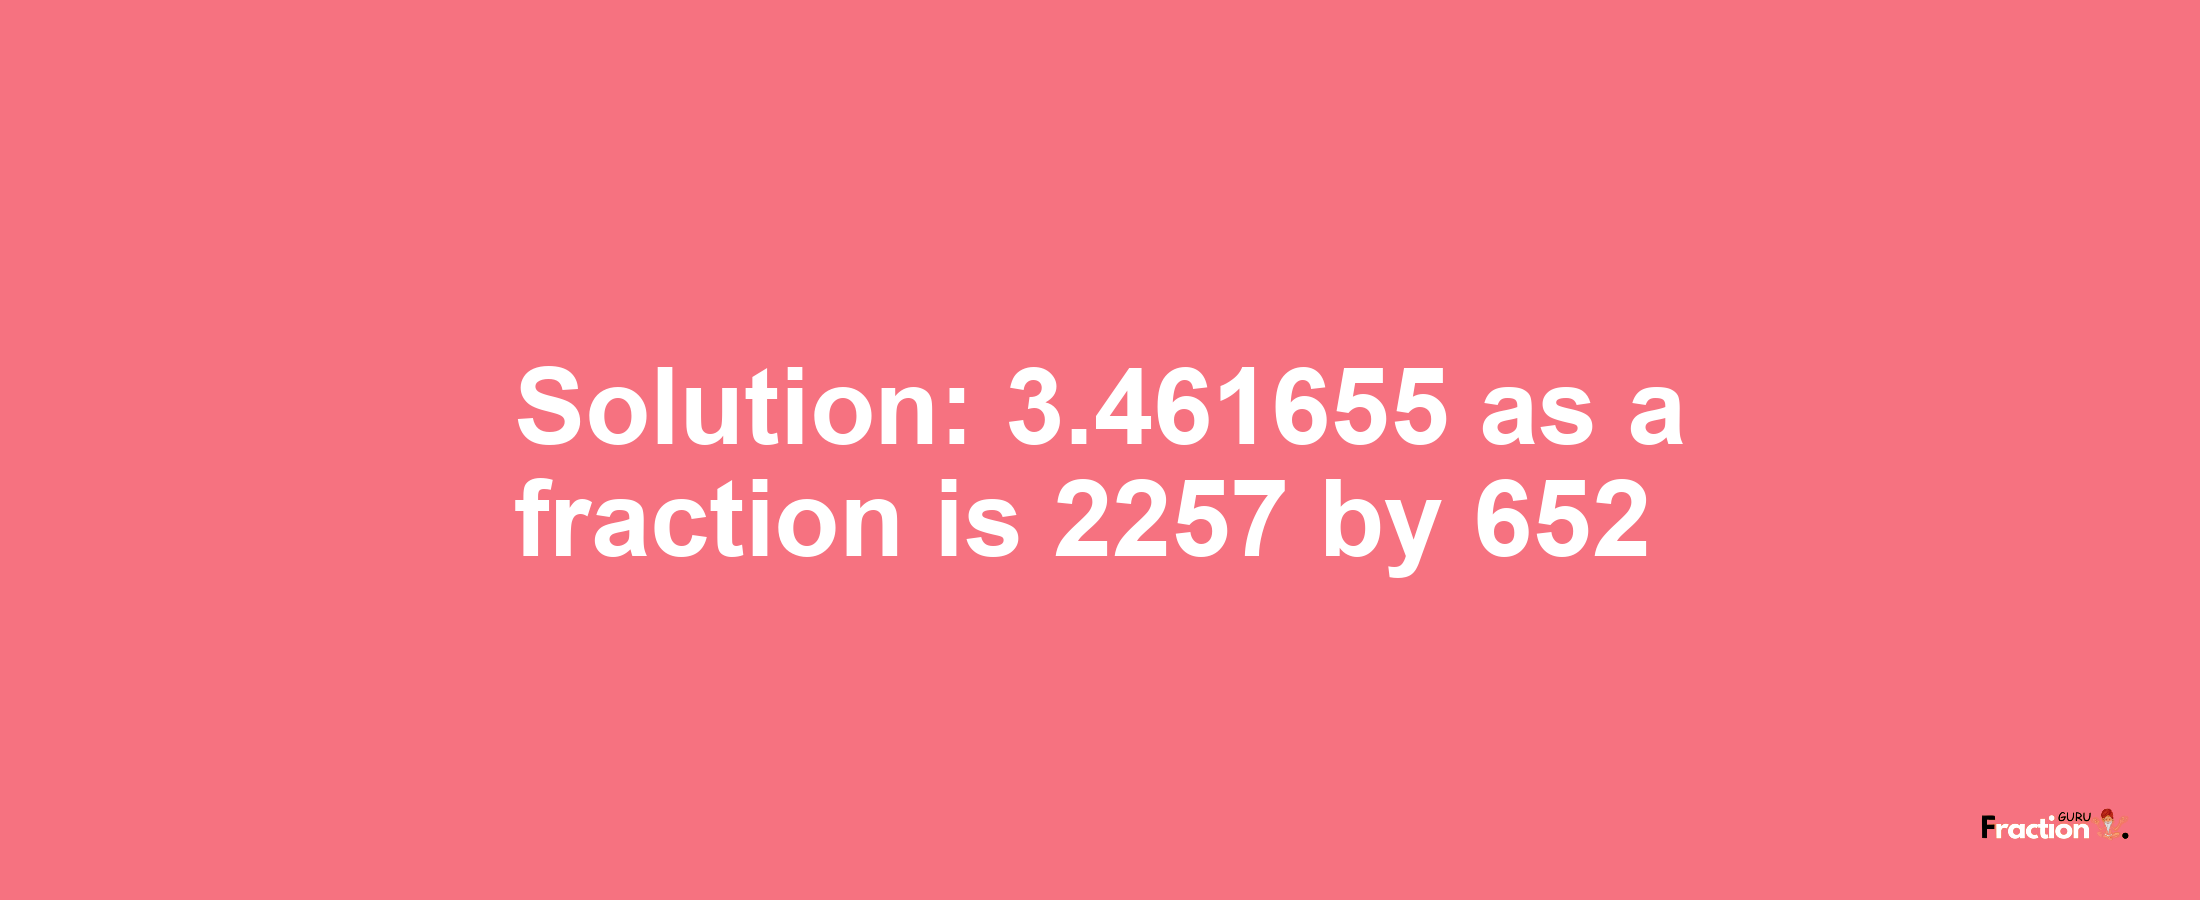 Solution:3.461655 as a fraction is 2257/652